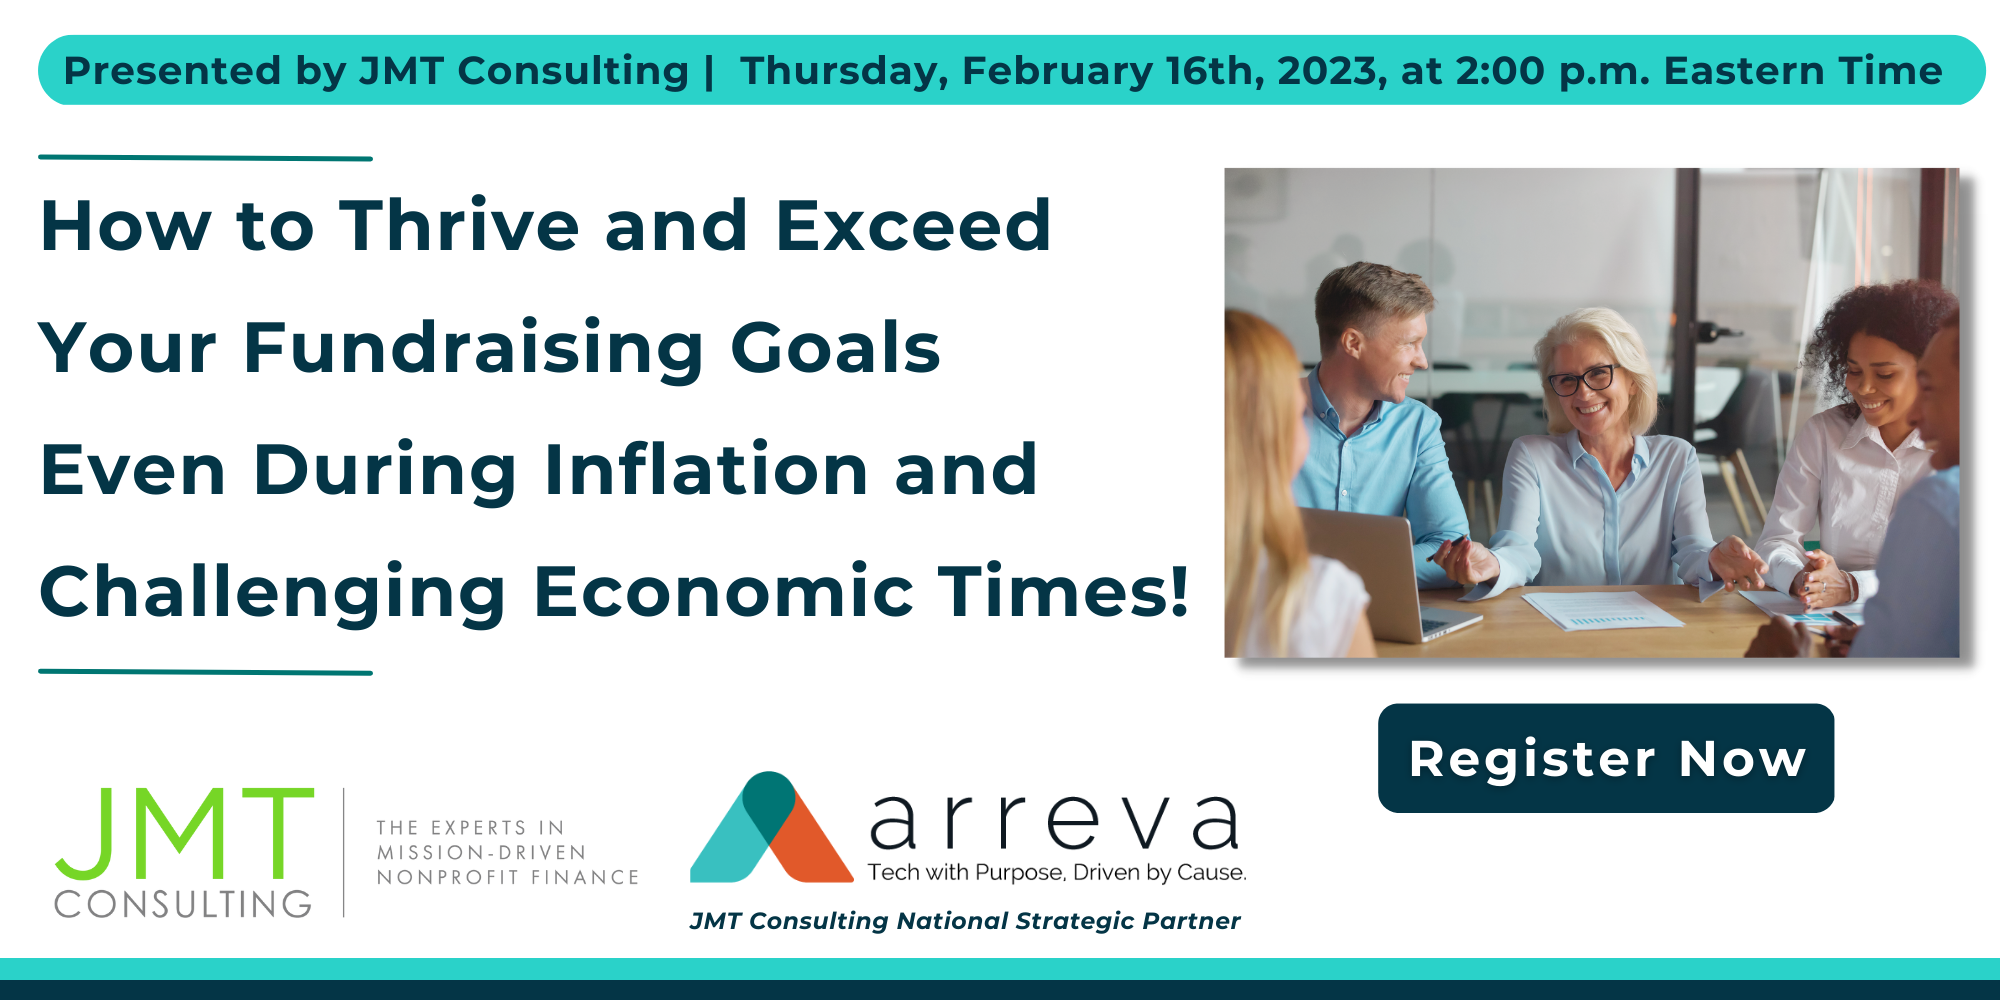 How to Thrive and Exceed Your Fundraising Goals Even During Inflation and Challenging Economic Times!